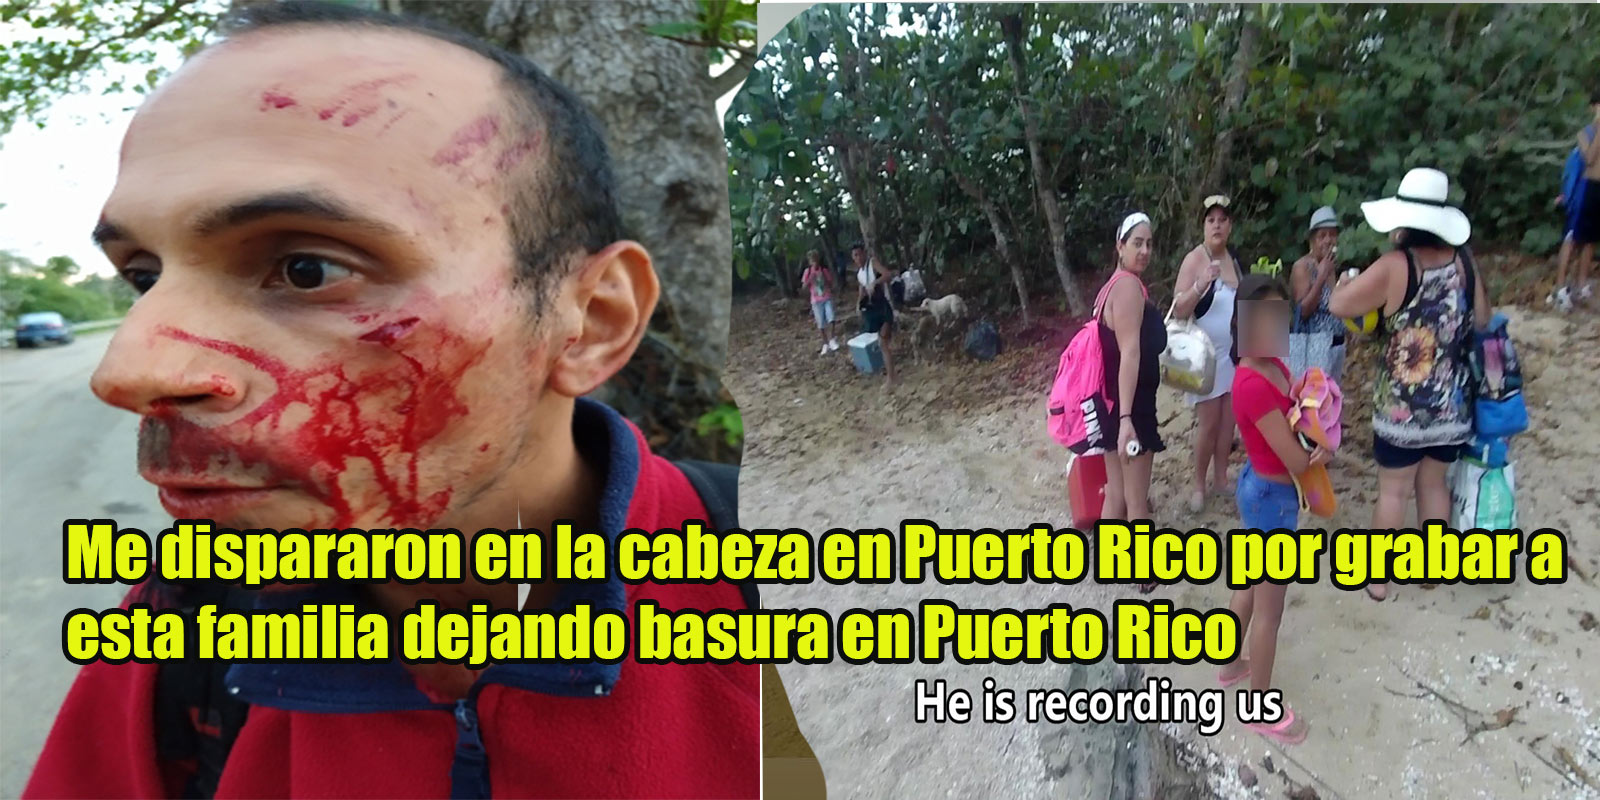 Video: Shot At The Head In Puerto Rico For Recording Family Leave Garbage